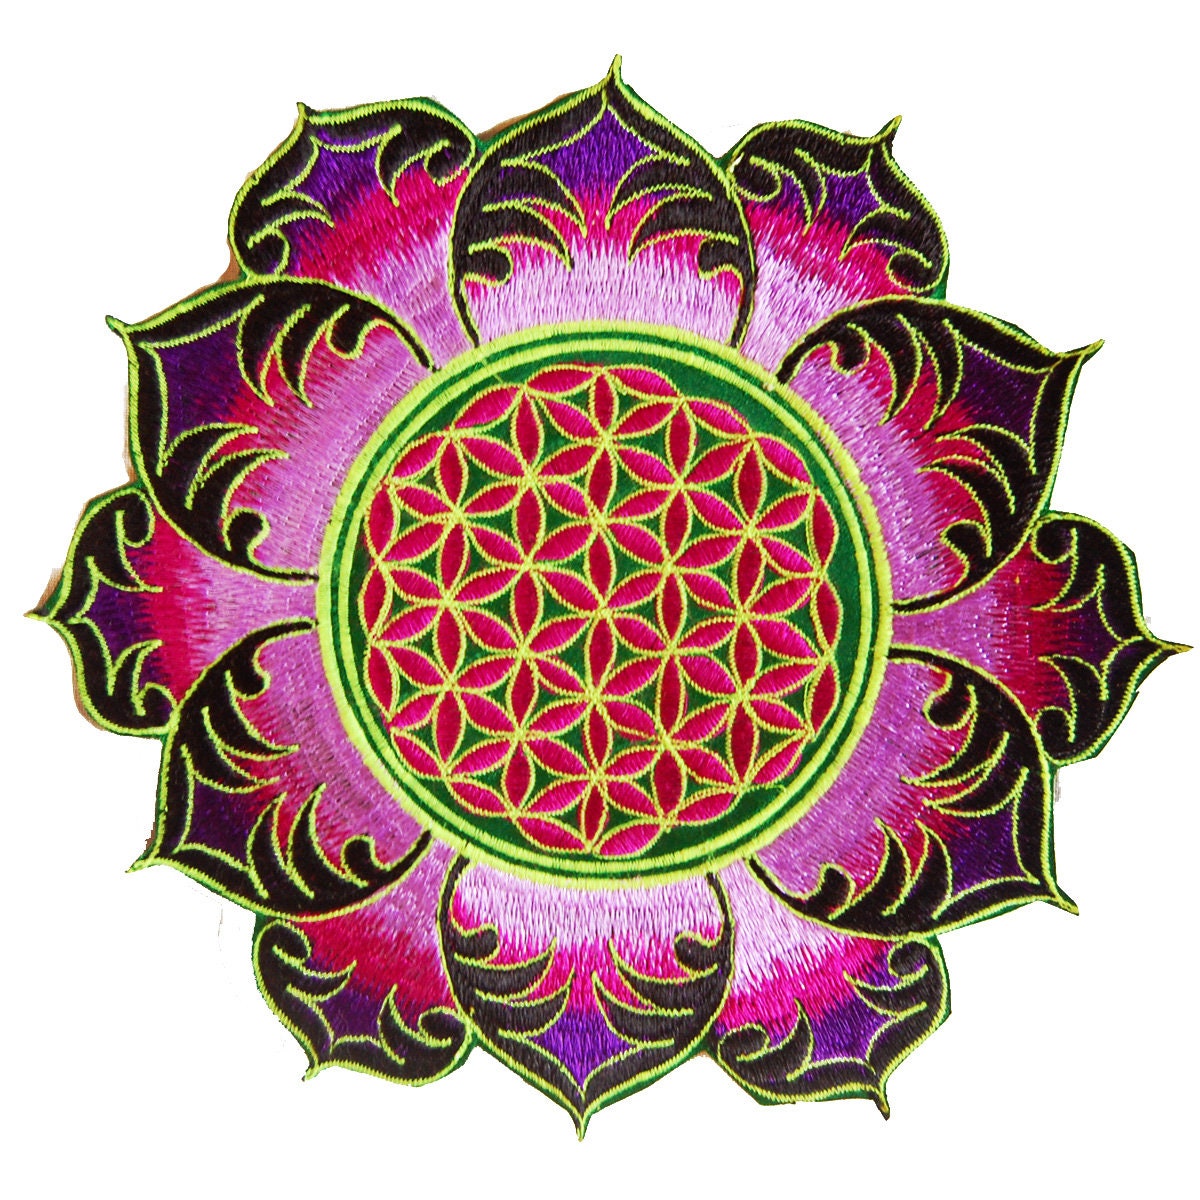 Green Purple Flower of Life holy geometry patch fractal mandala sacred geometry embroidery art for sew on